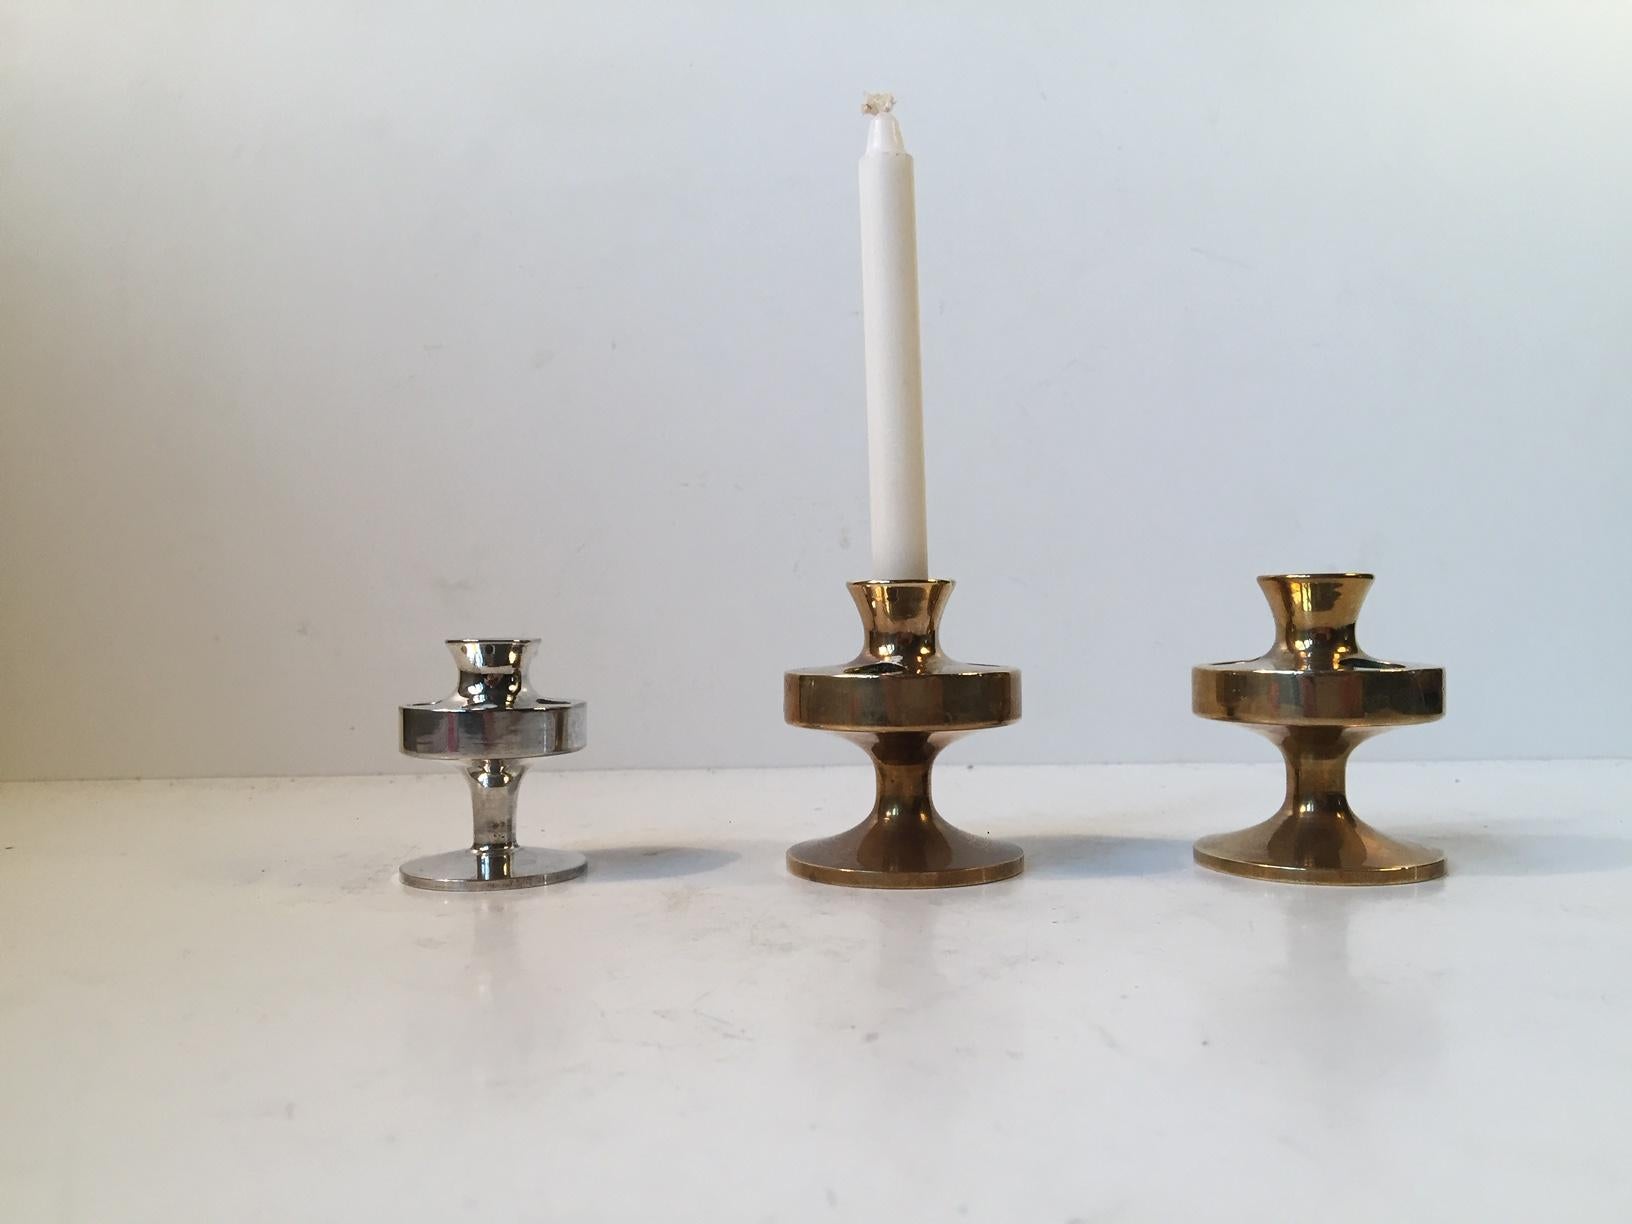 - A set of 3 small taper candleholders
- Two pieces in brass and a silver plated smaller one
- The candleholders can contain 4 and 5 candles
- The silver plated candleholder measures: 5 cm in height
- The brass candleholders measure: 6 cm in